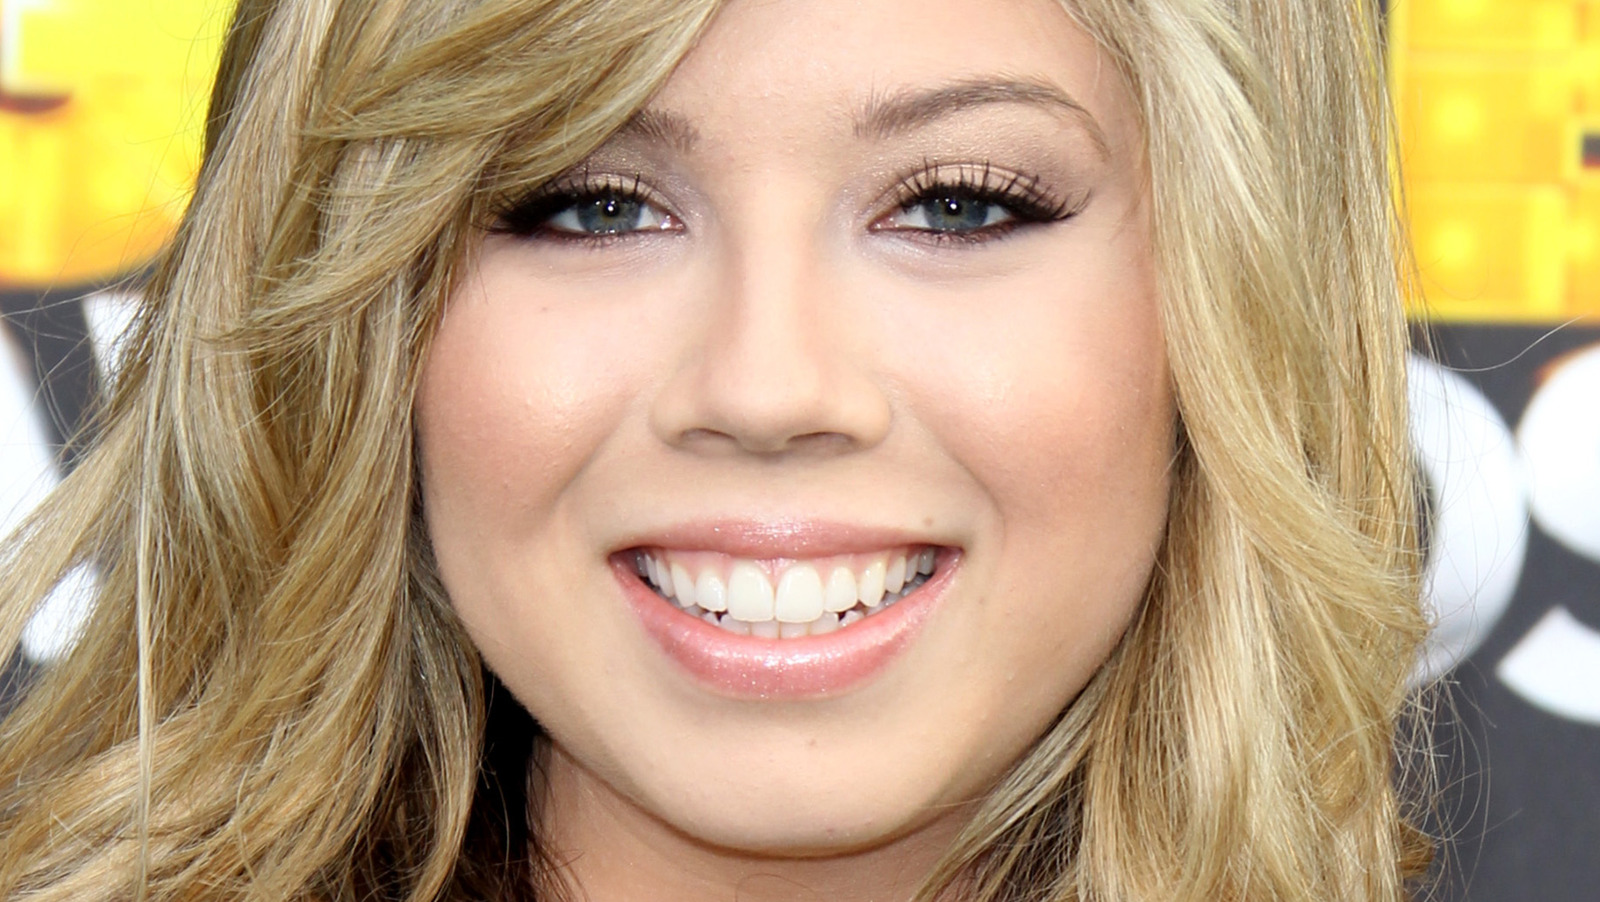 Jennette McCurdy reveals the alarming habits her mother encouraged her to develop